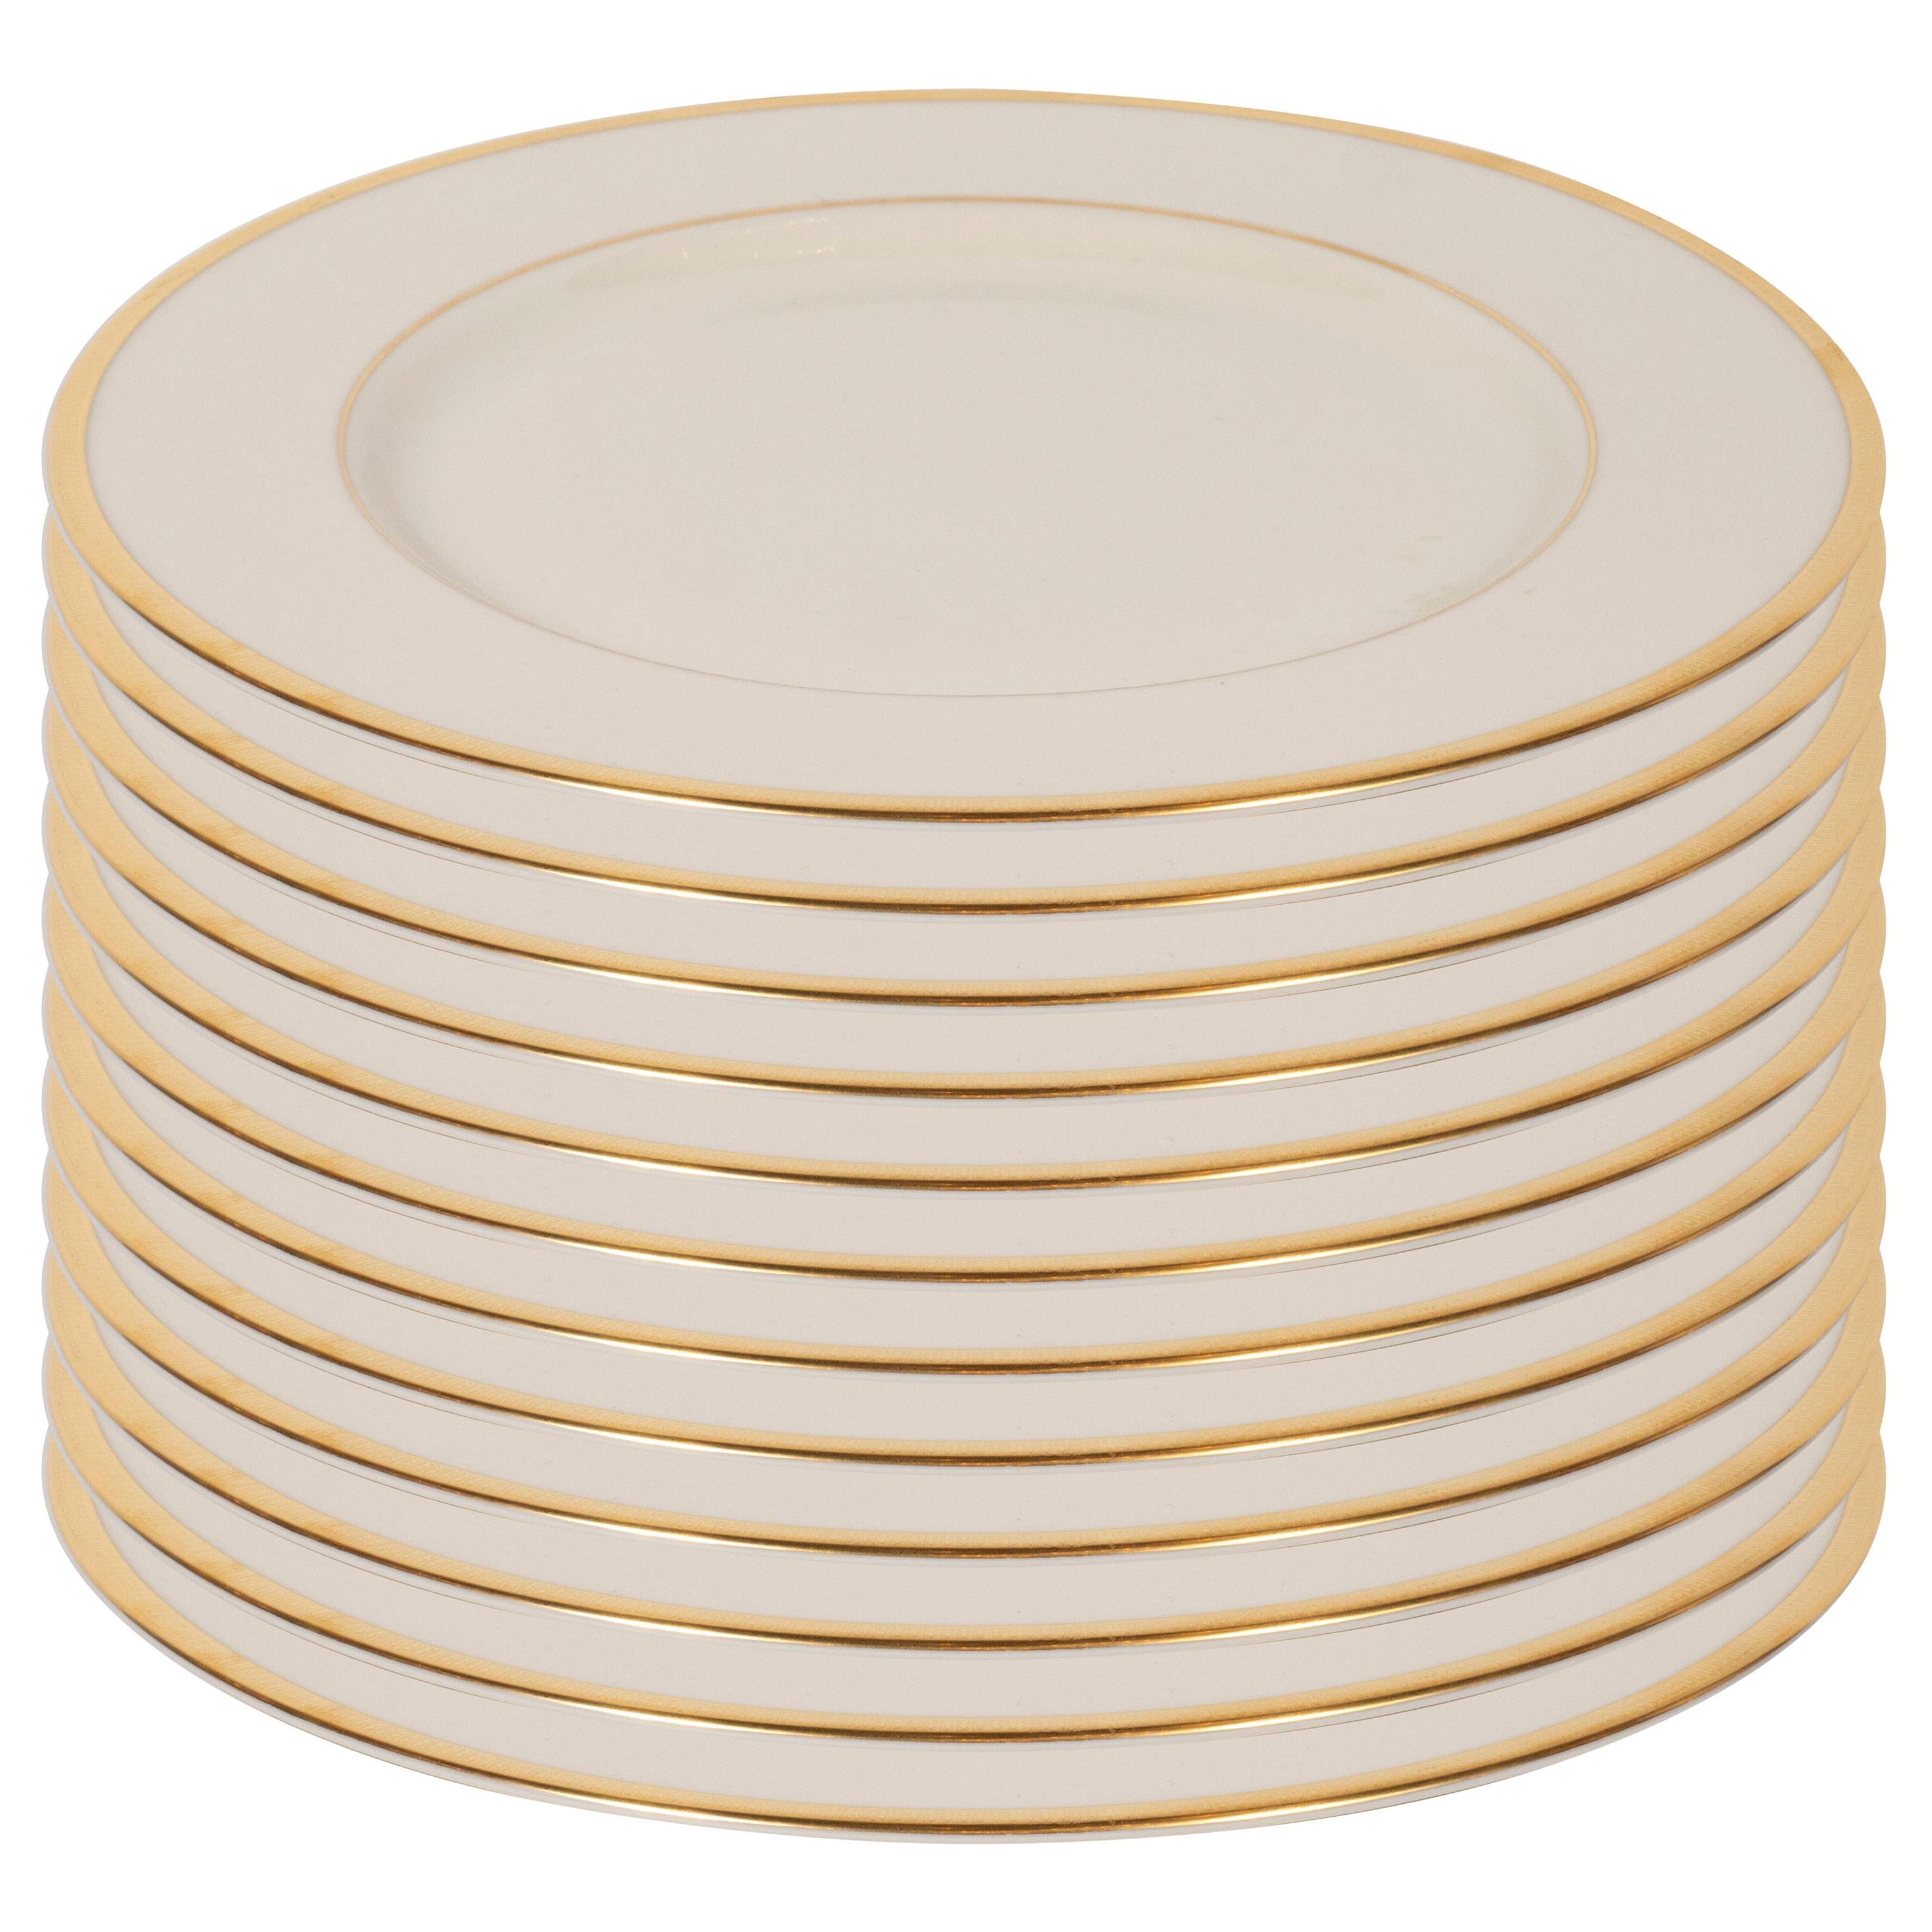 Set of 12 Modernist Dinner Plates in 24-Karat Gold and Bone China by Lenox